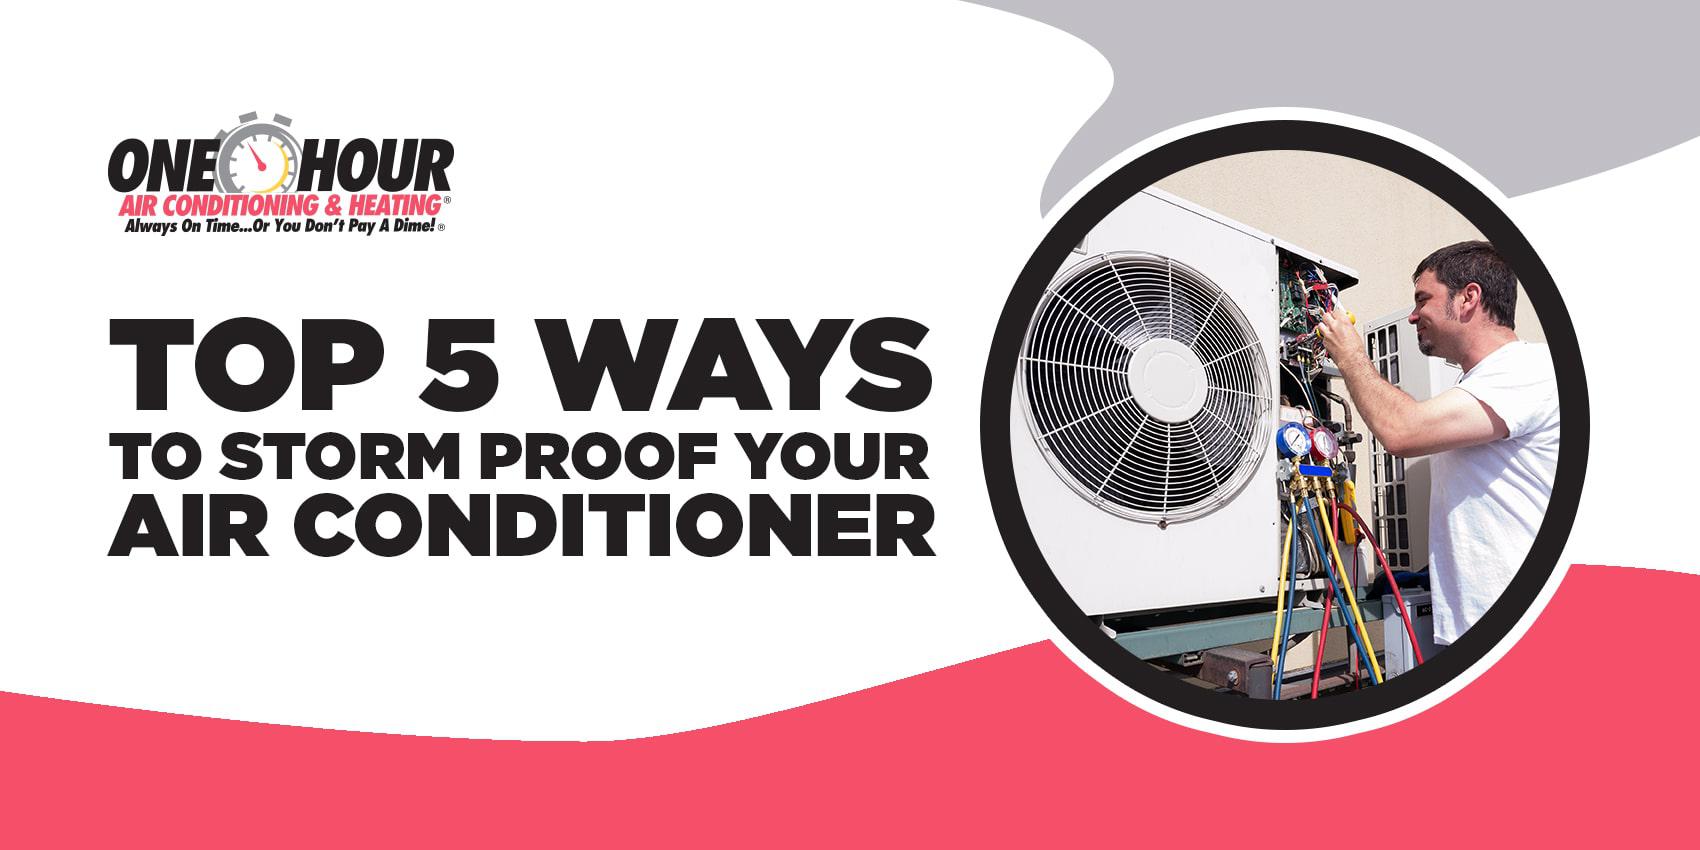 Top 5 Ways to Storm Proof Your Air Conditioner